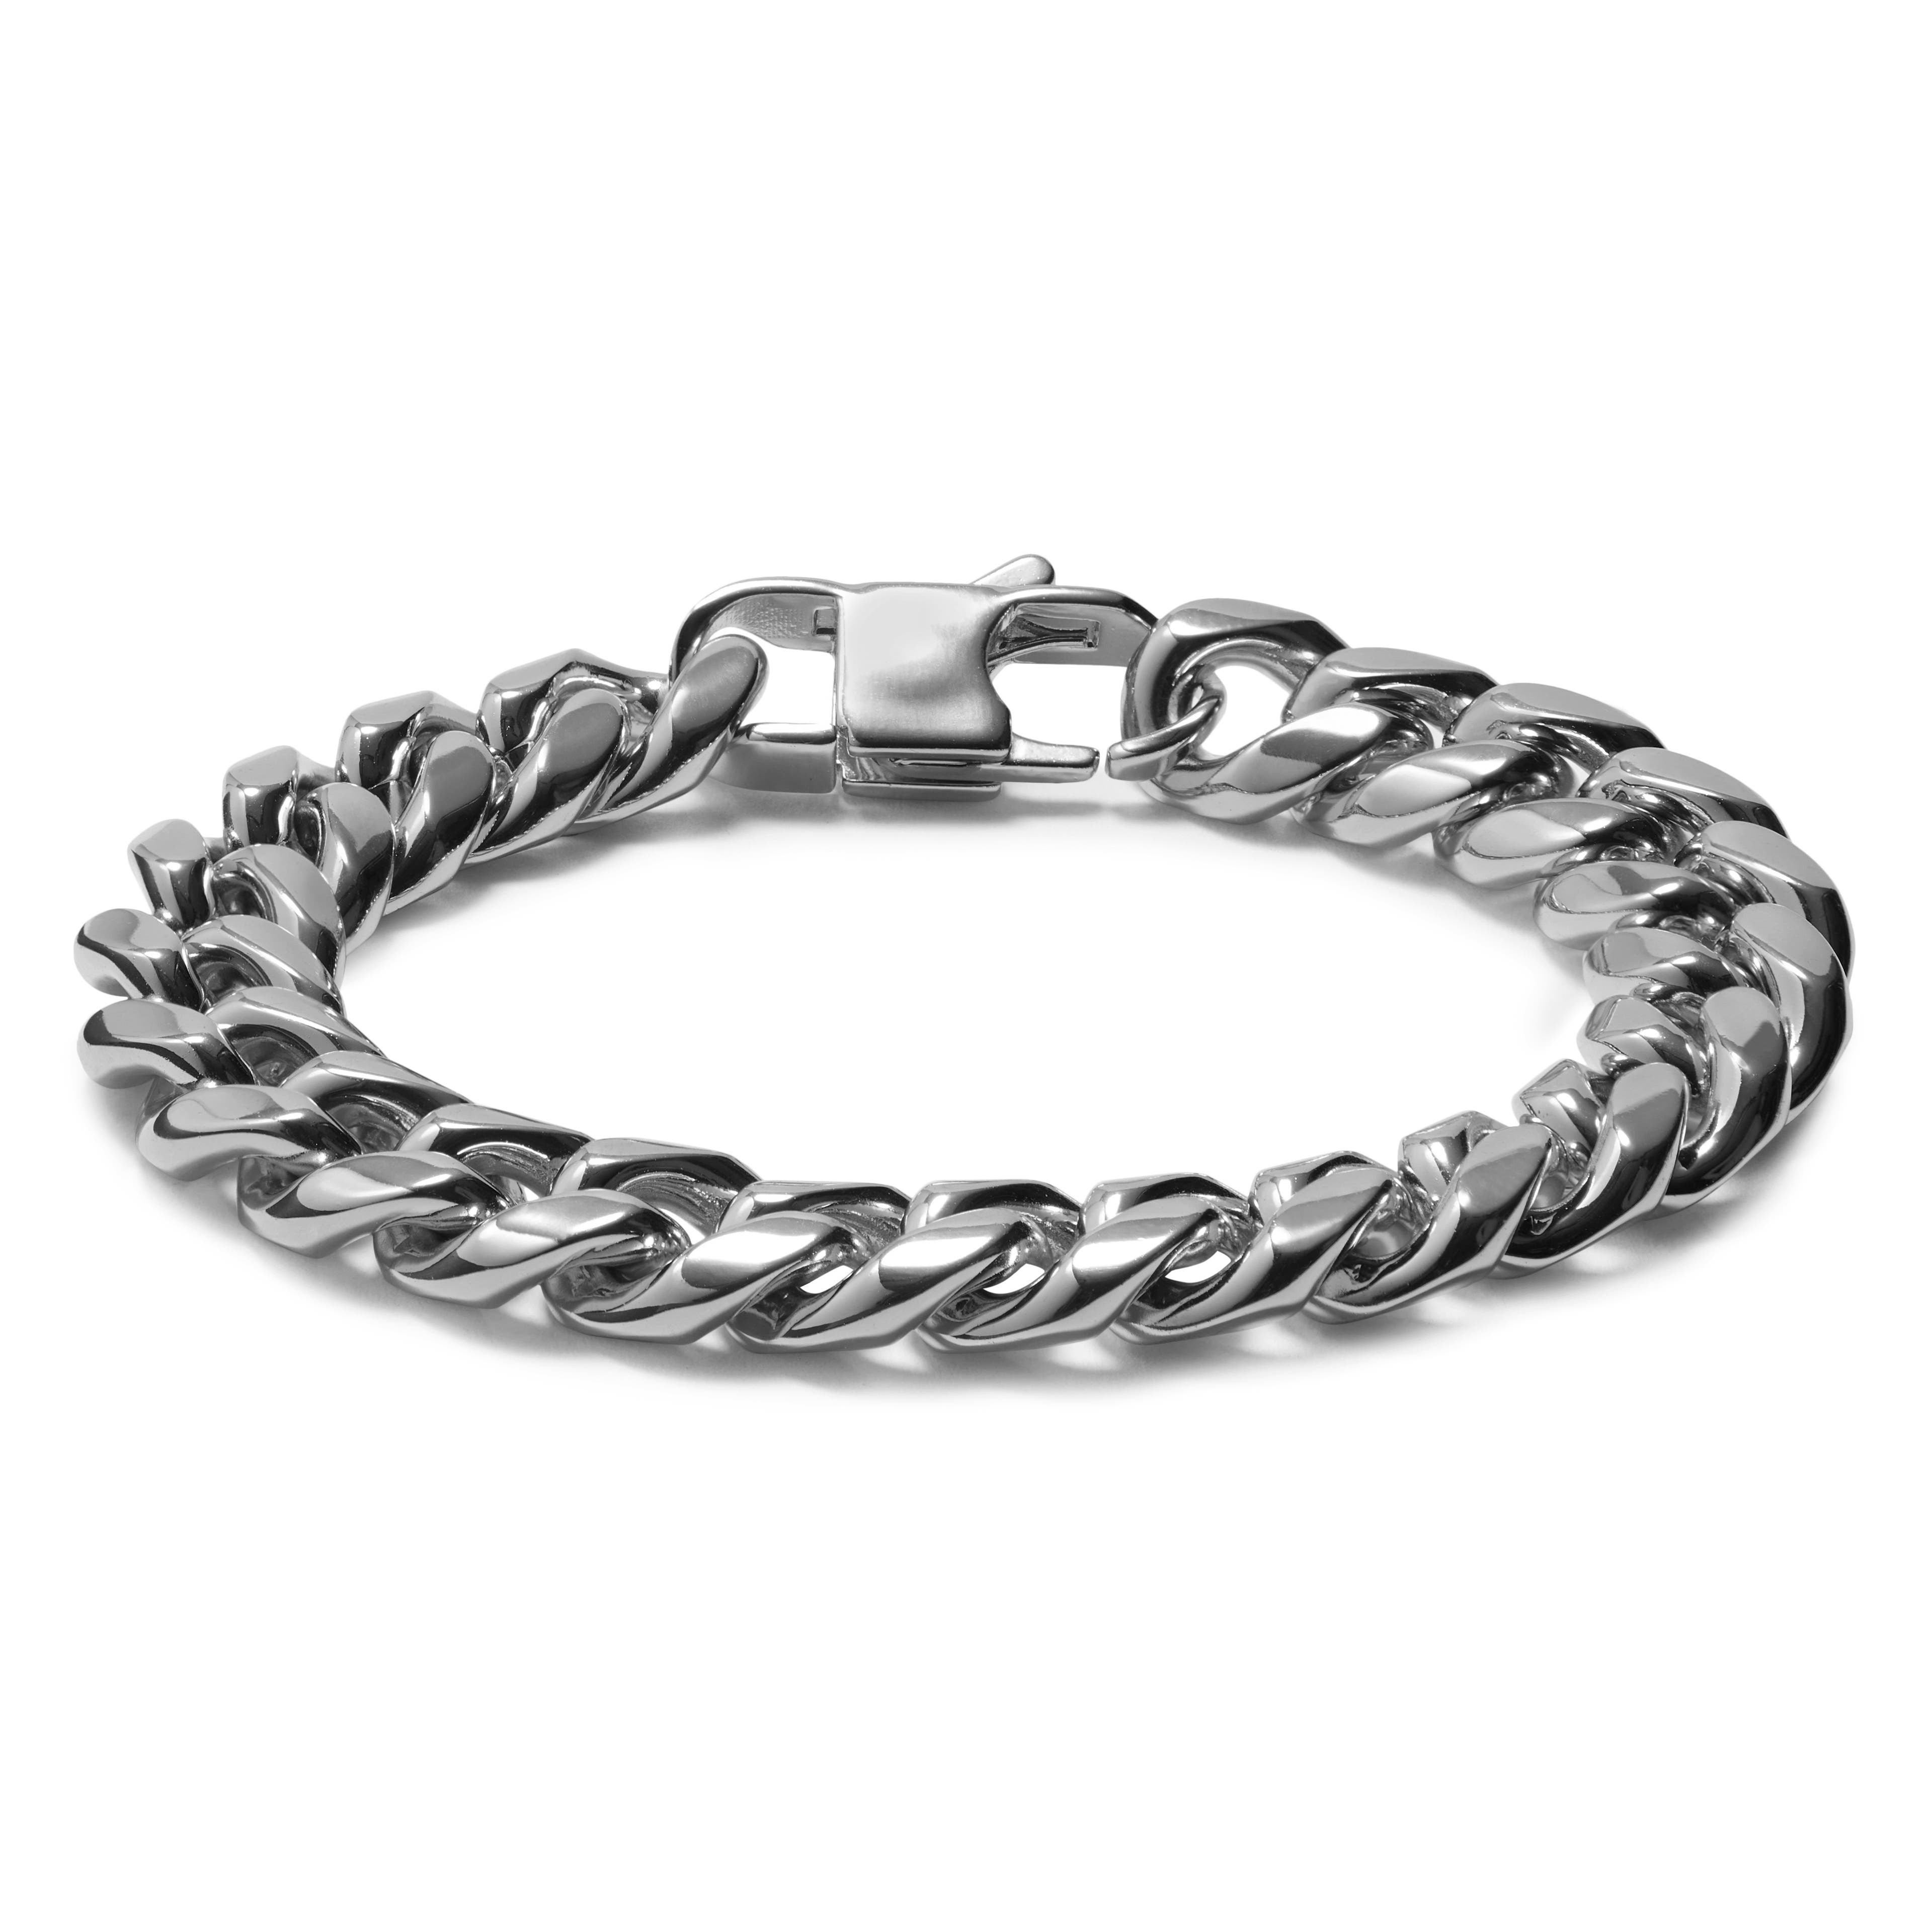 12mm Silver-Tone Stainless Steel Curb Chain Bracelet | In stock! | Lucleon